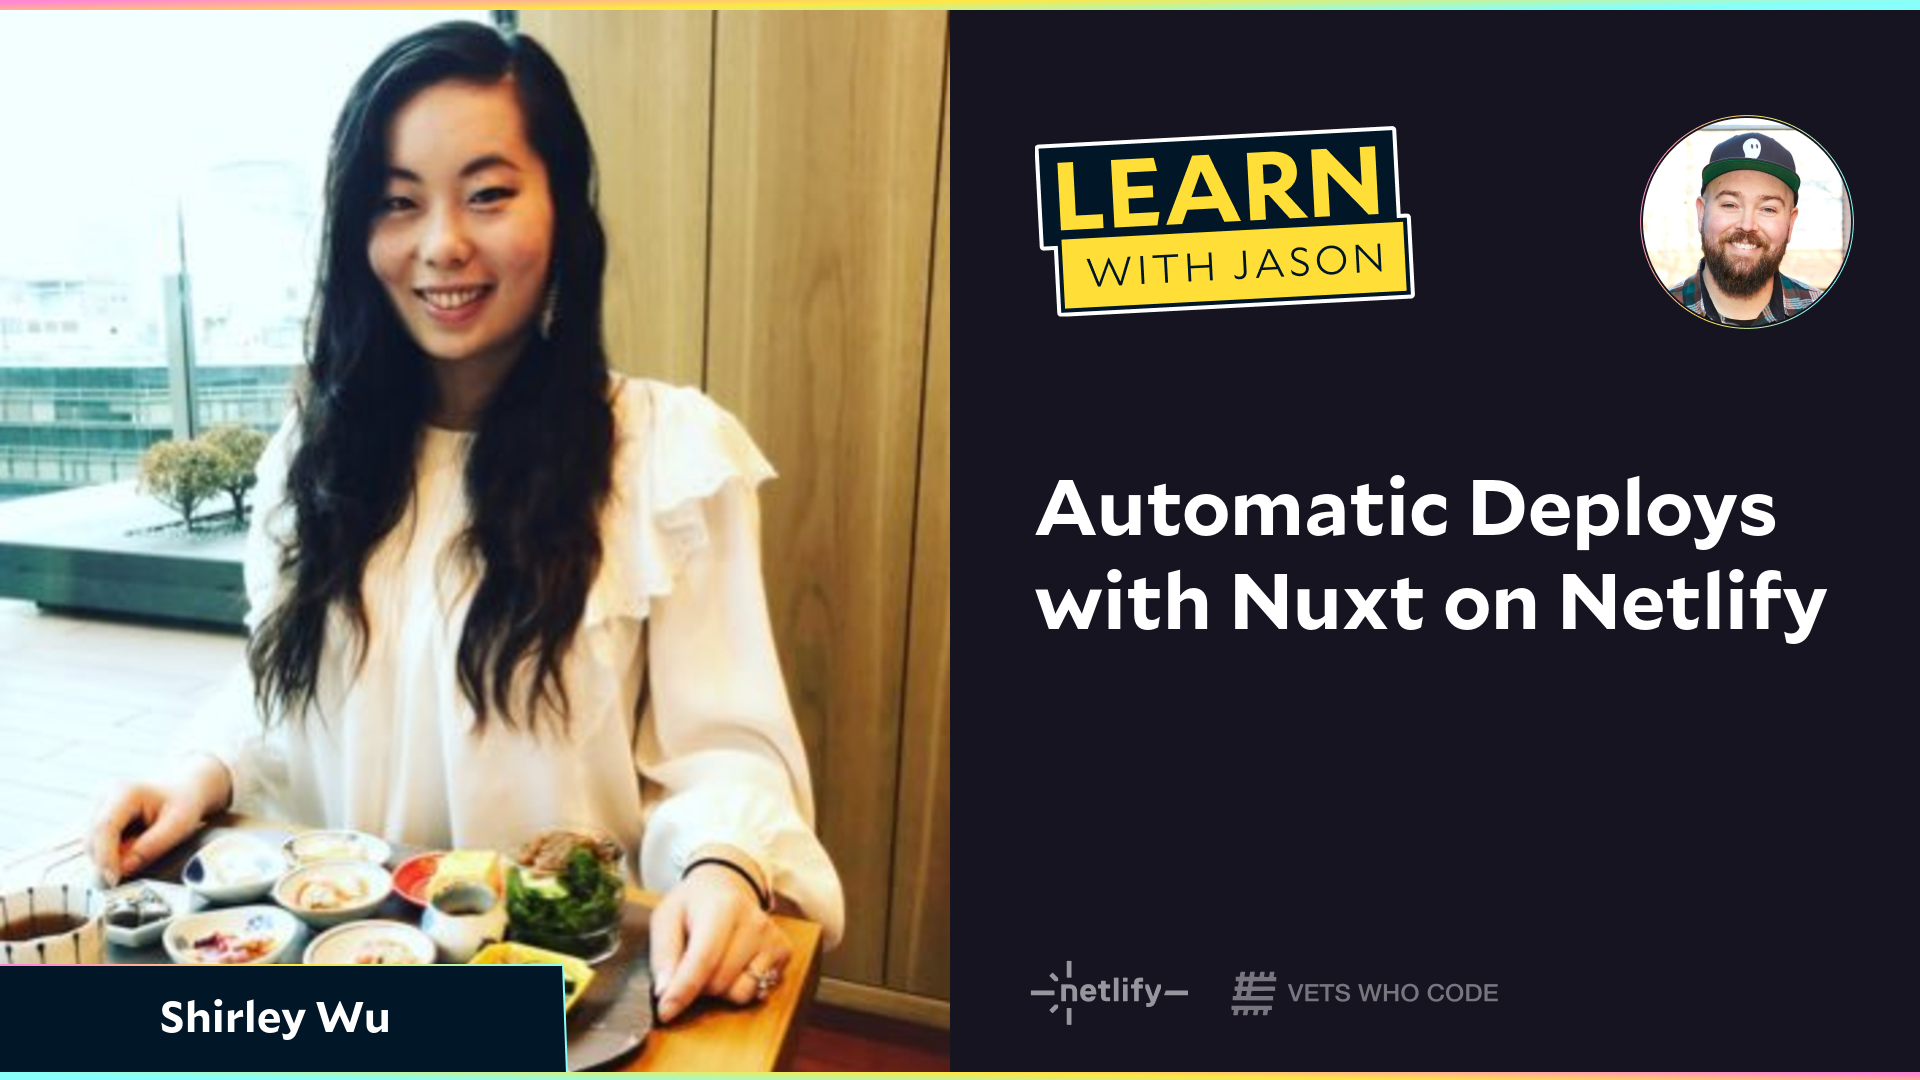 Automatic Deploys with Nuxt on Netlify (with Shirley Wu)